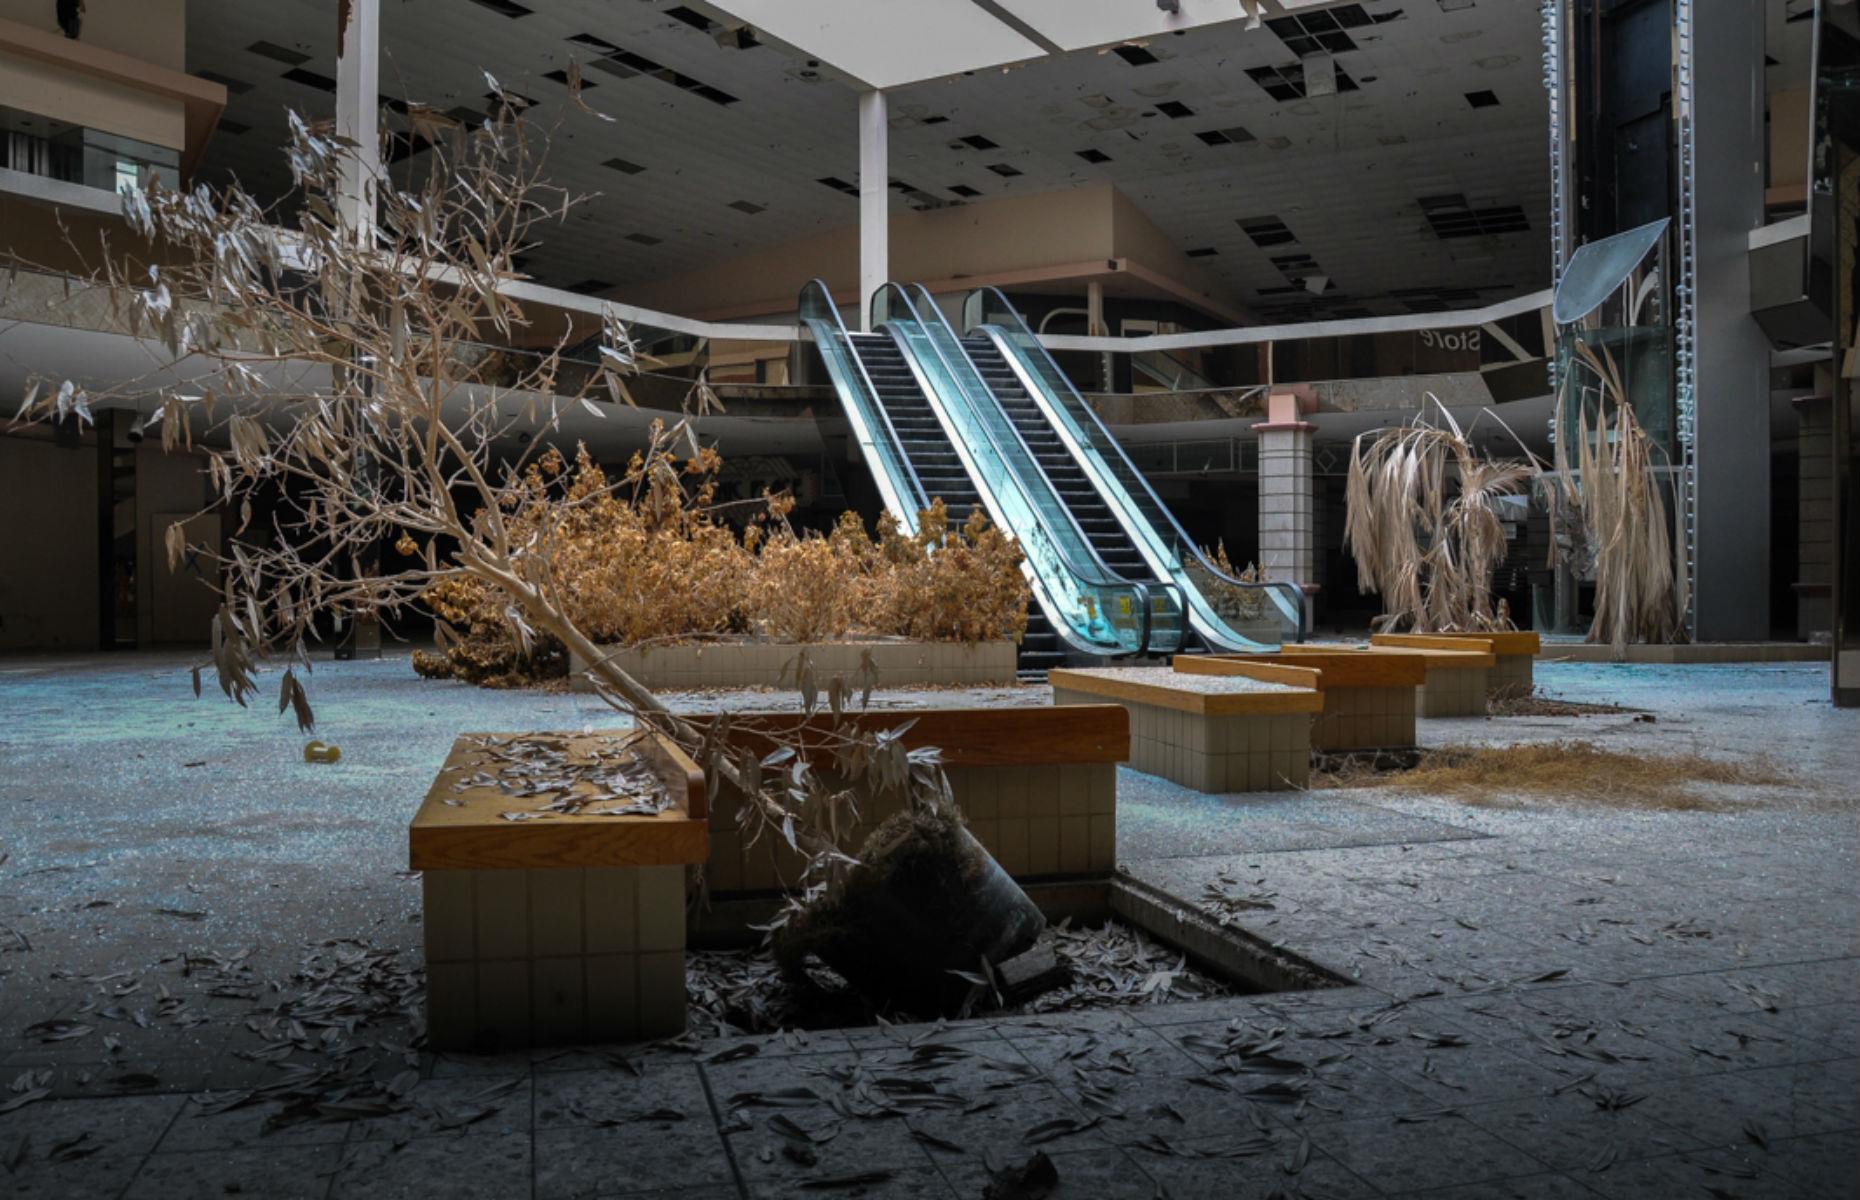 The story of murders that happened at various malls